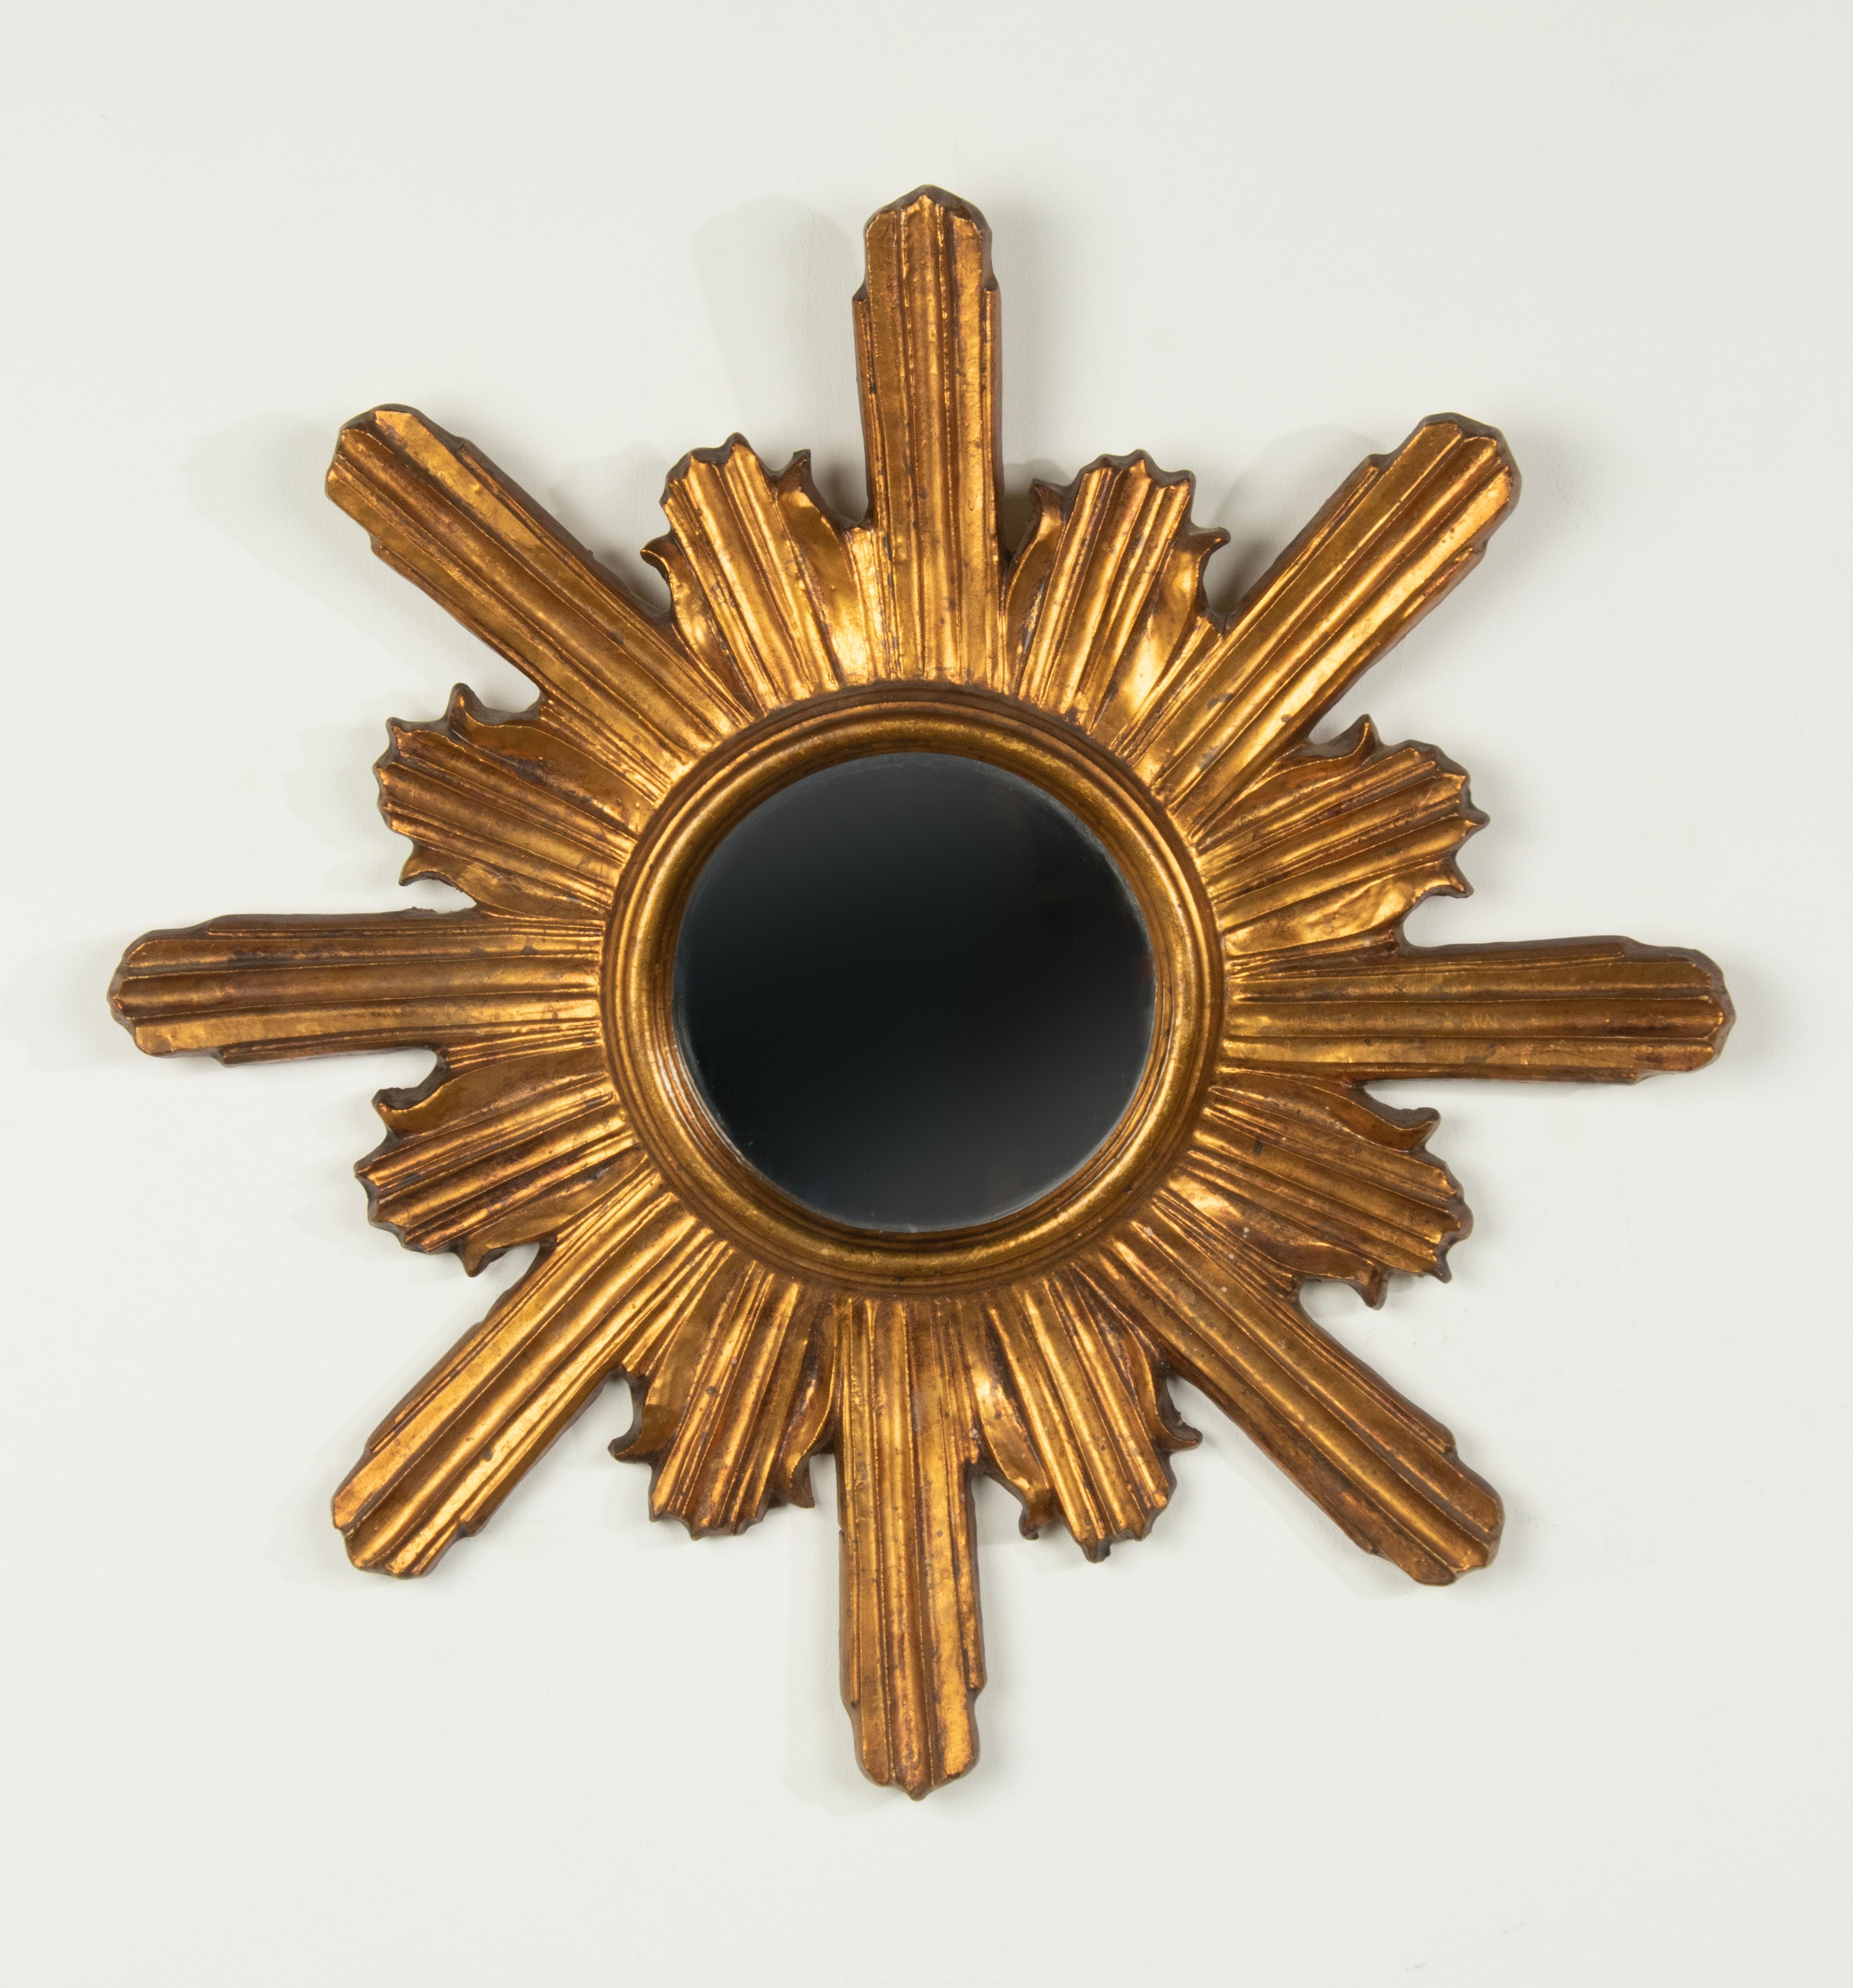 Beautiful antique gilt wood sunburst mirror. The mirror is made of hand carved wood, with gilt patina. With a flat glass mirror. Wood and glass are in good condition. Dating from circa 1920-1930, presumably of French manufacture. 
Dimension: 59 x 59